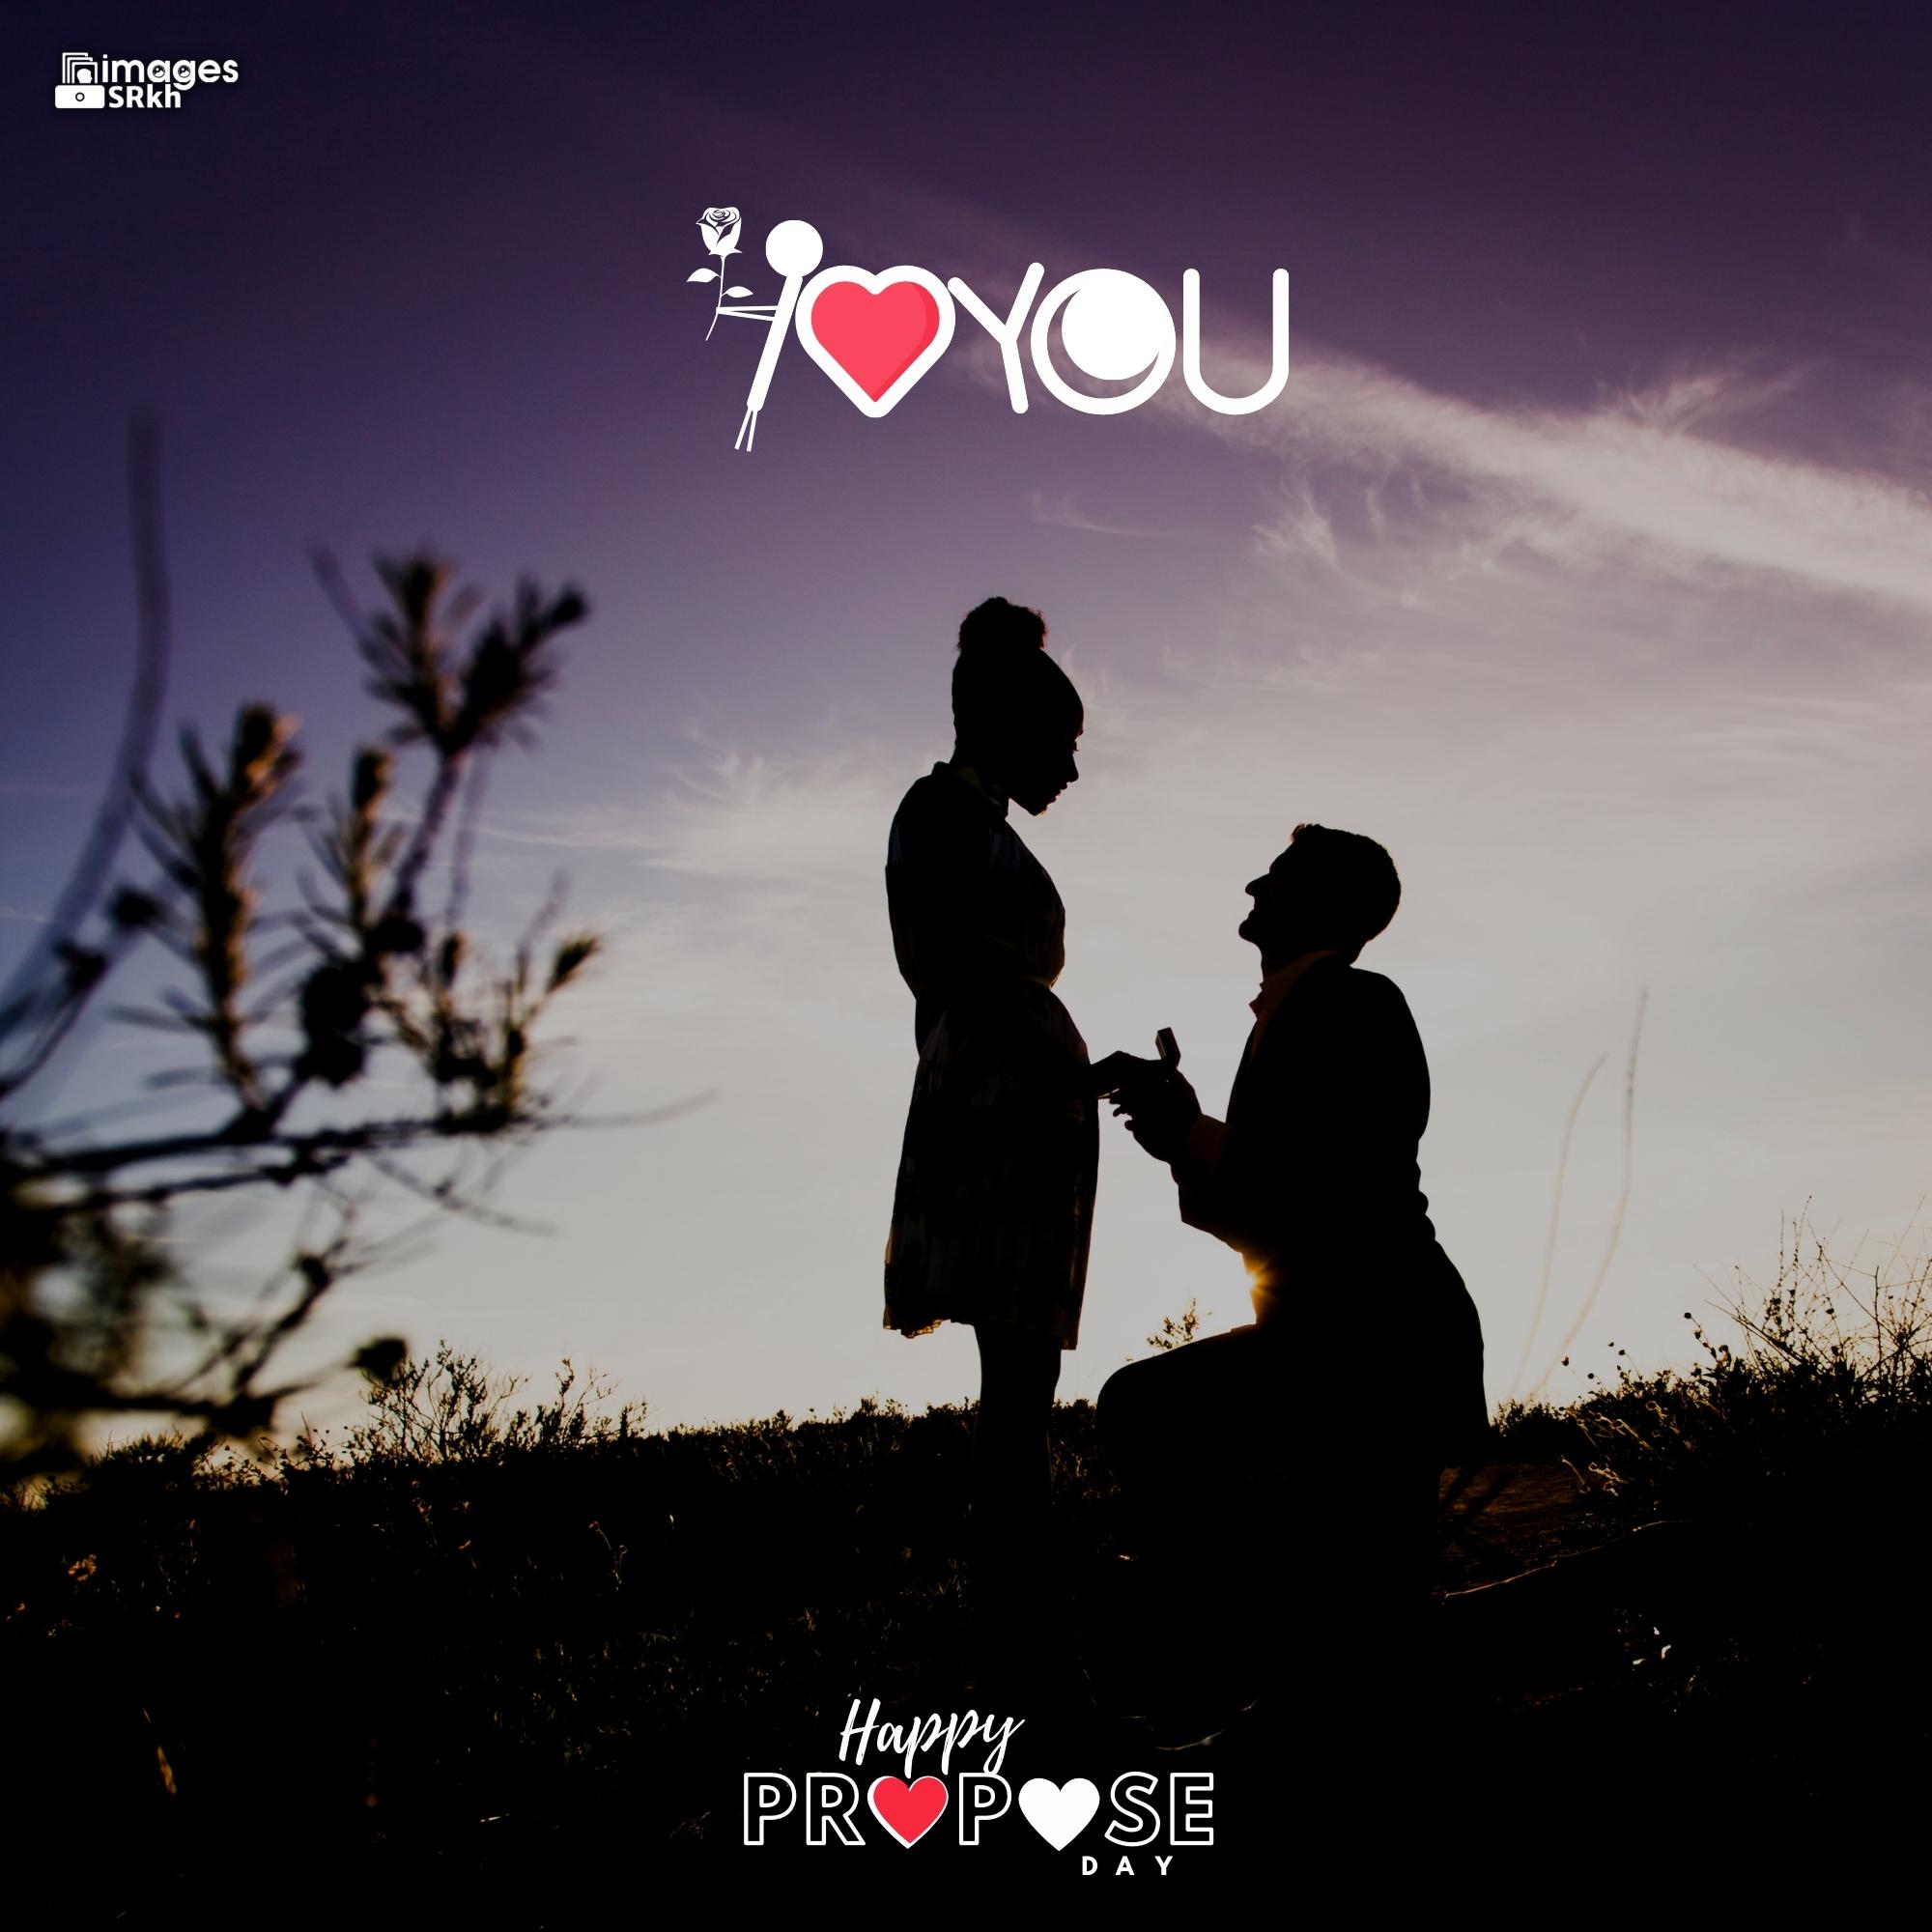 Happy Propose Day Images | 347 | I LOVE YOU